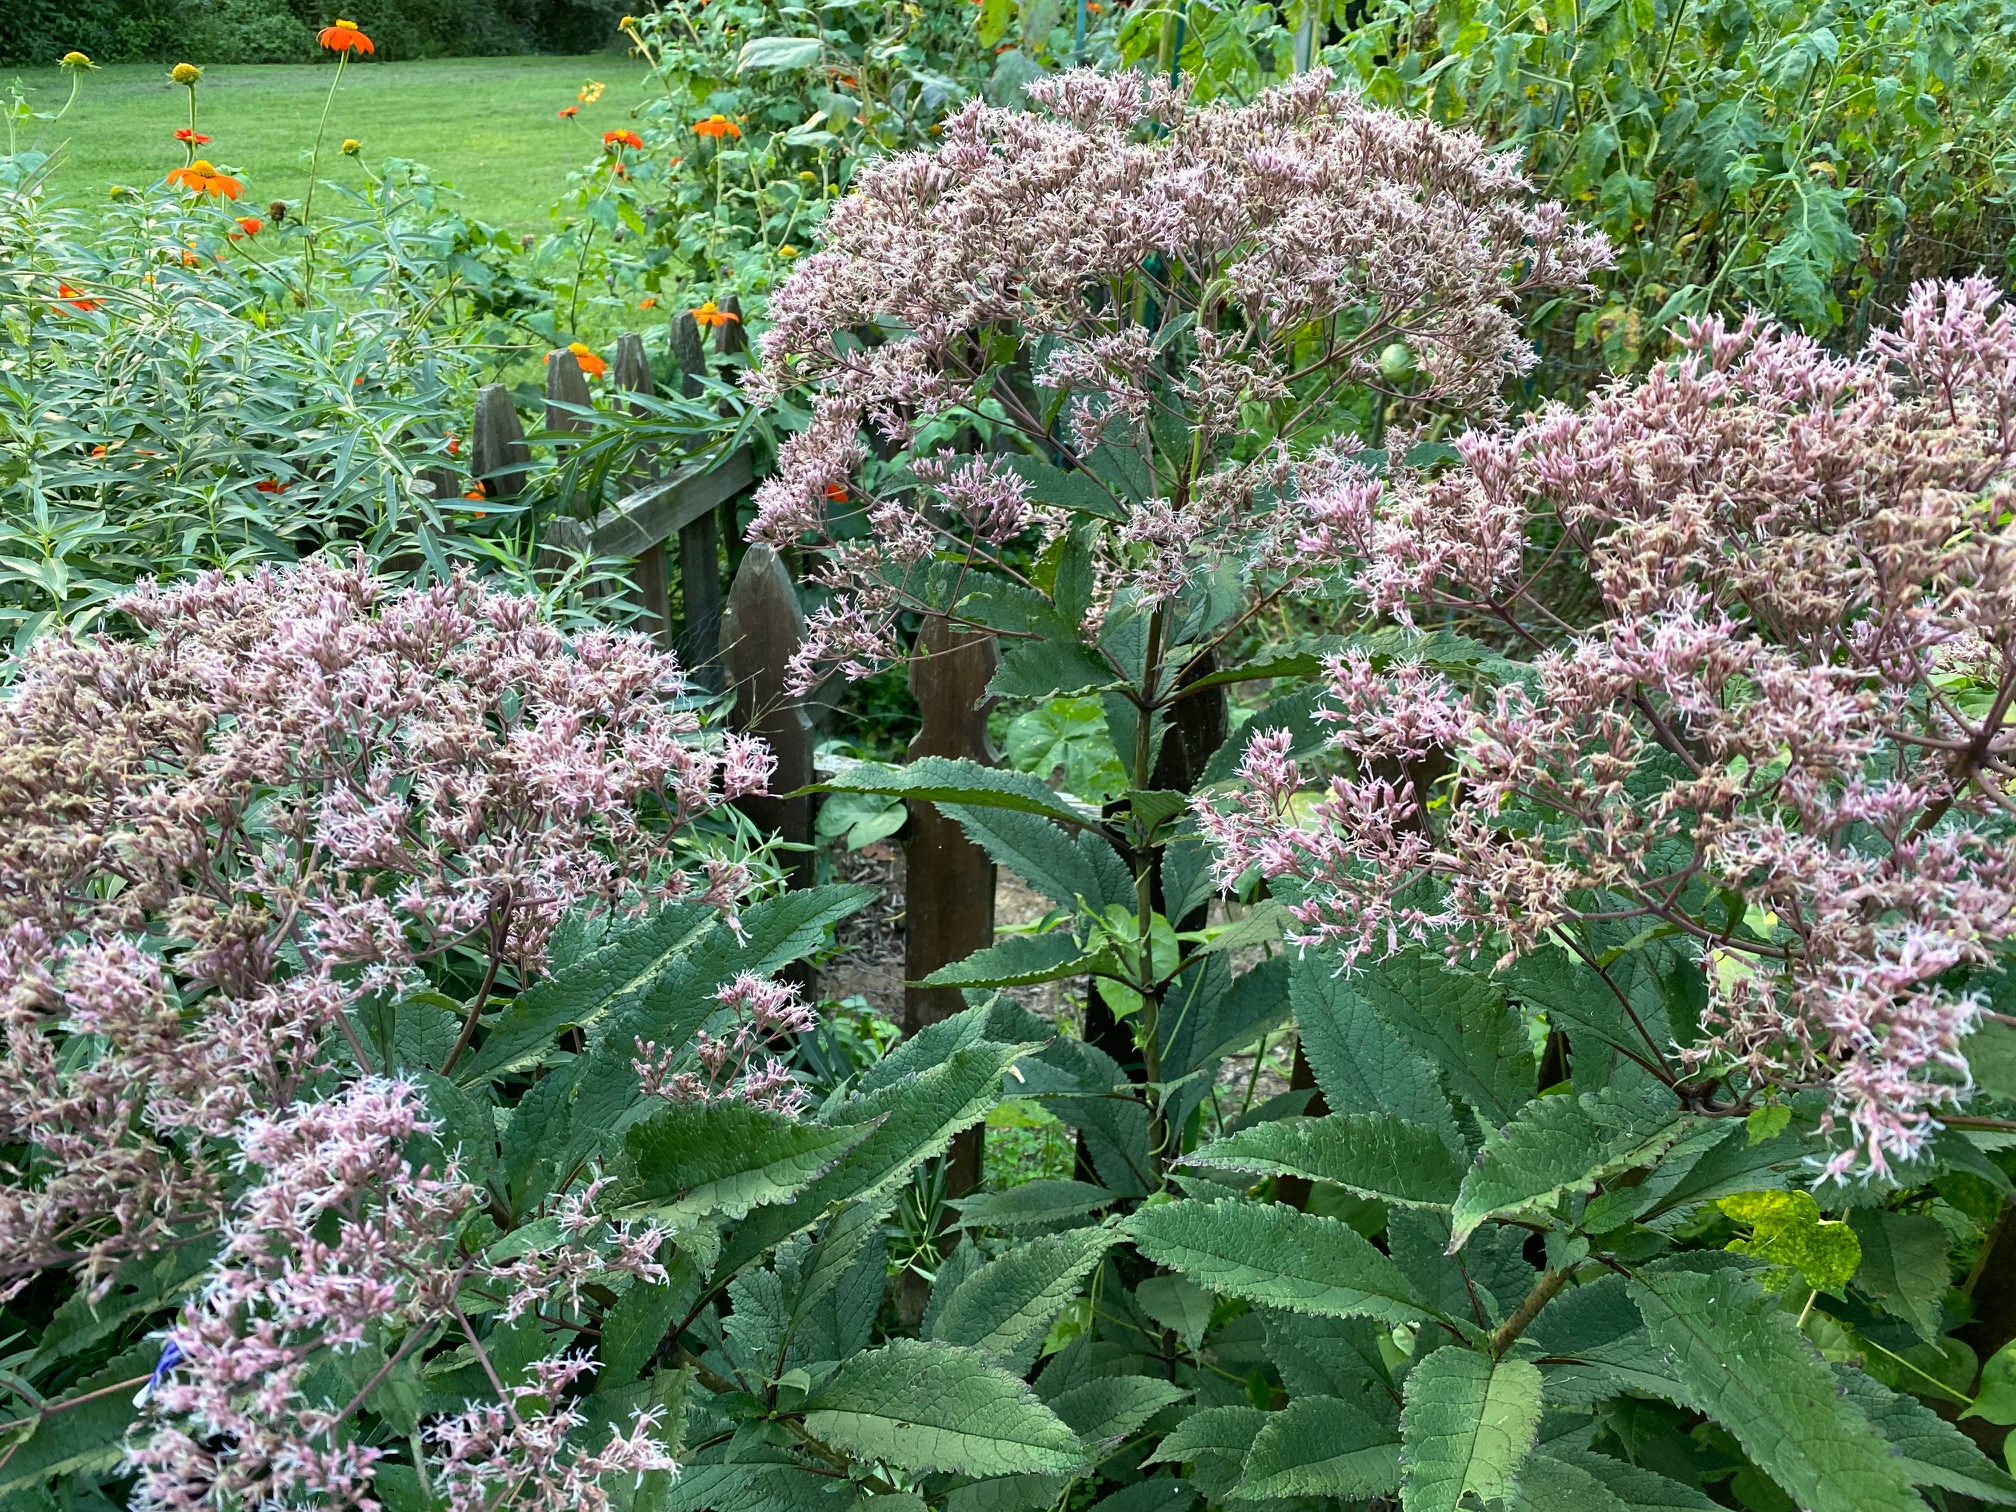 Read more about the article Take a Walk with Tavia #40 – Gateway Joe Pye Weed